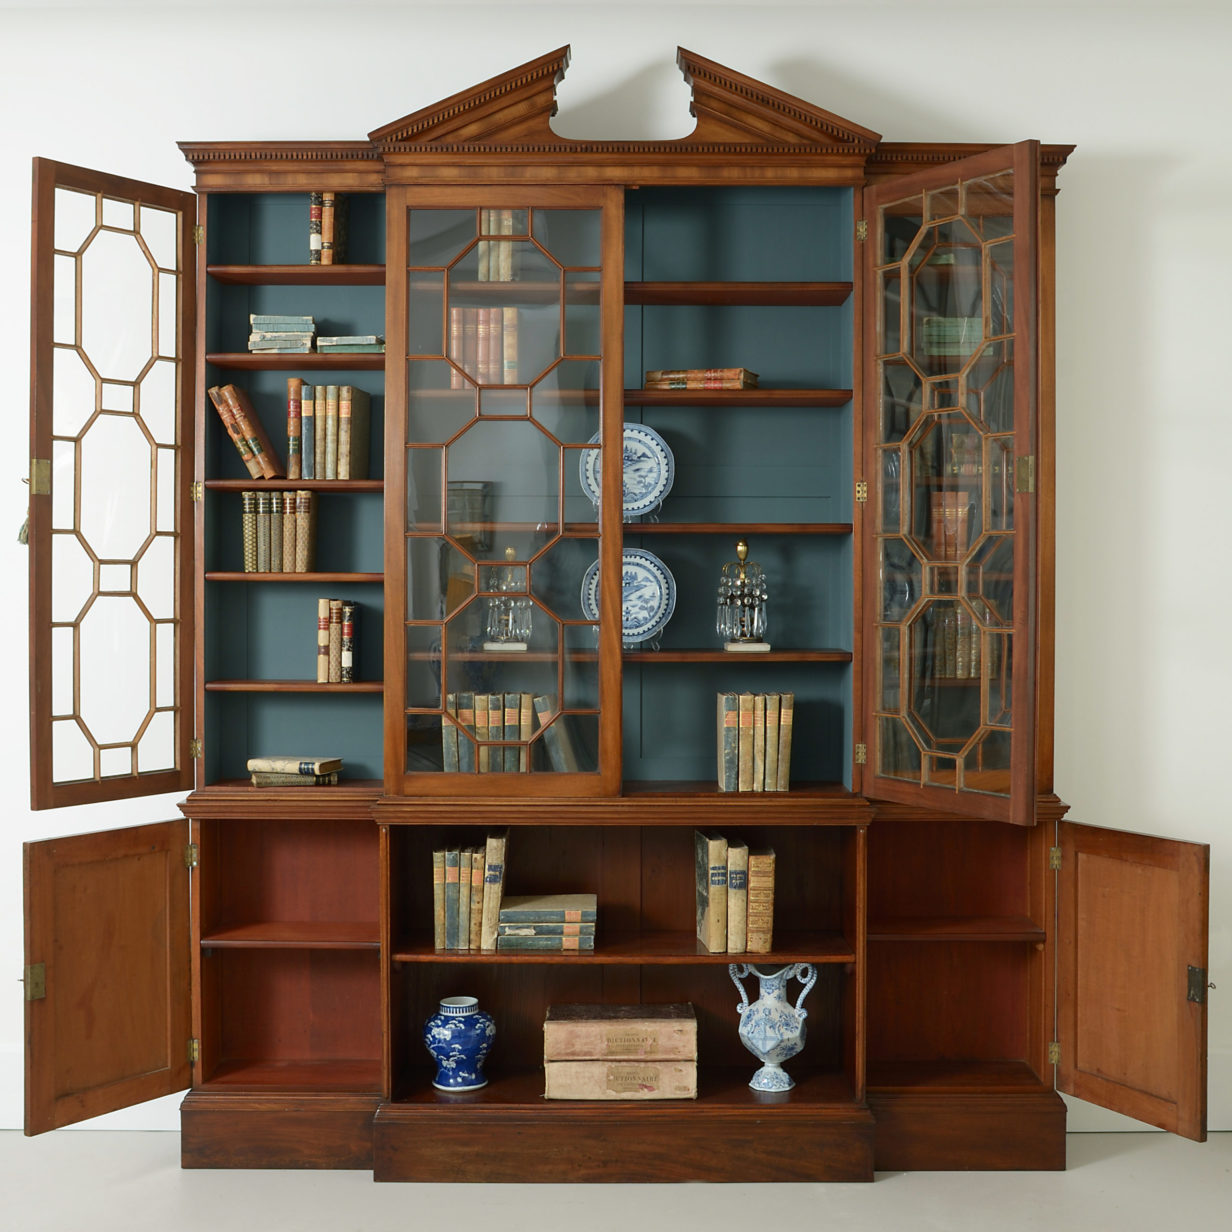 Chippendale breakfront bookcase